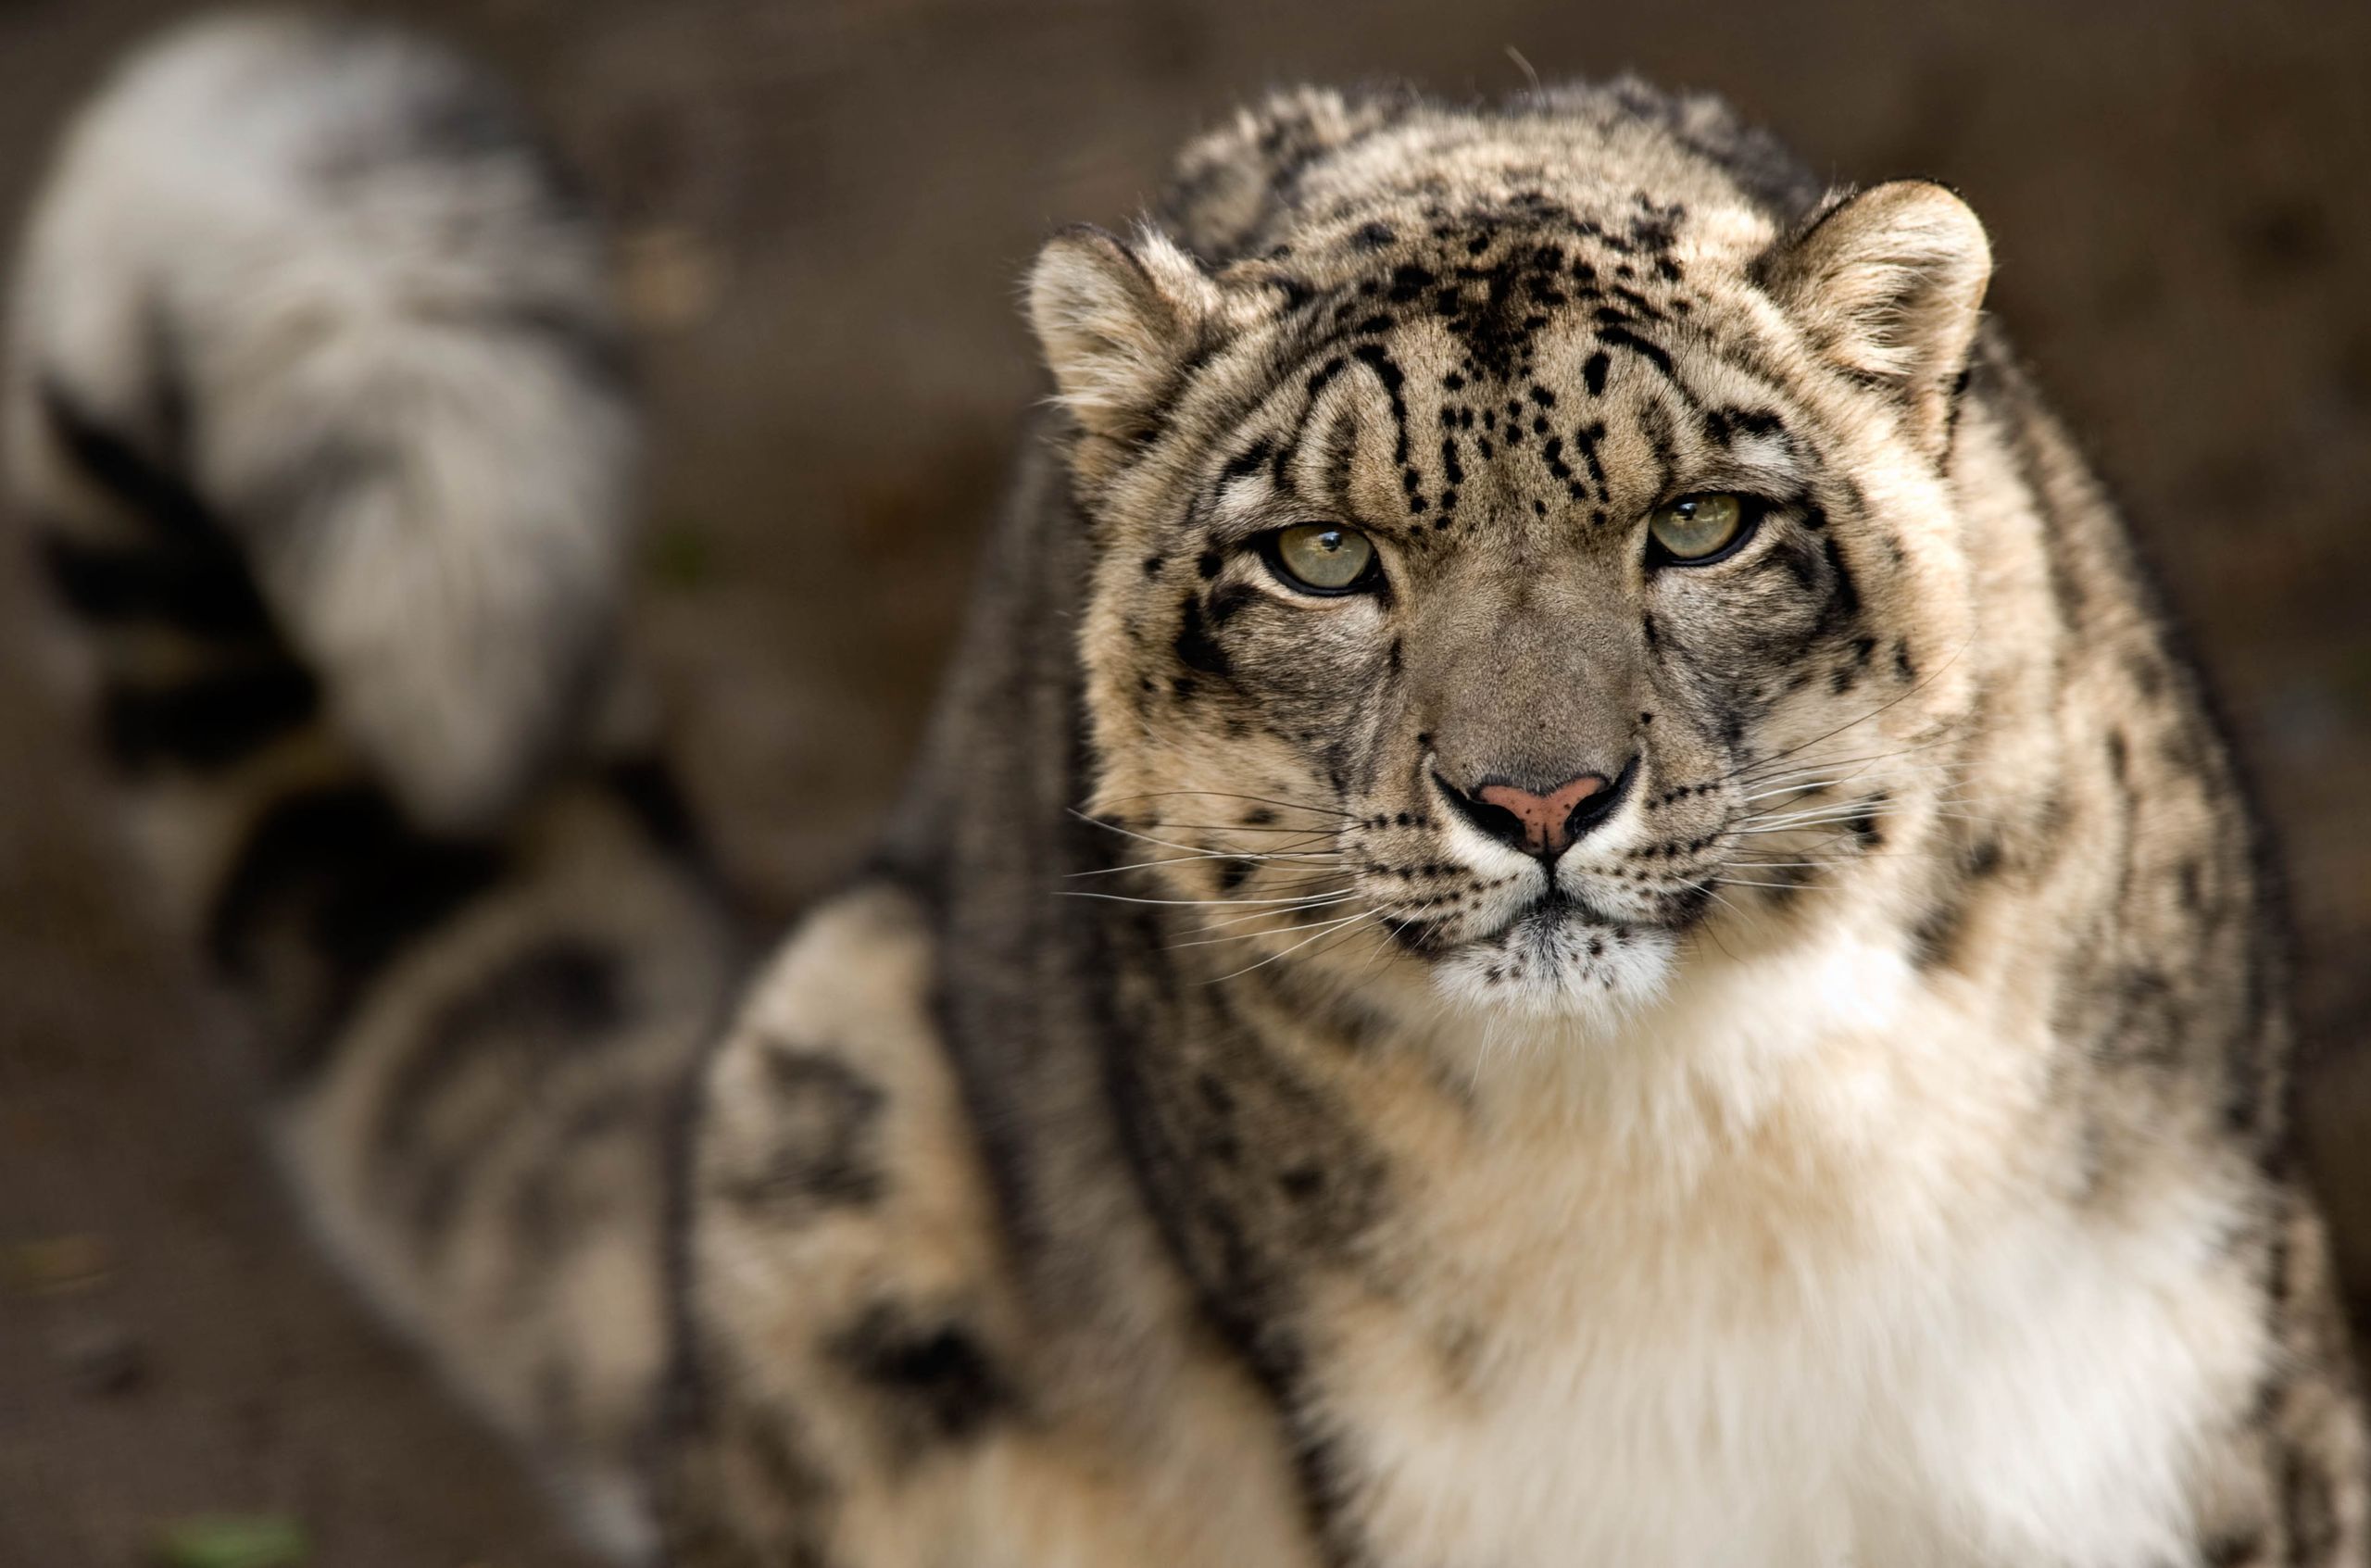 New Lock Screen Wallpapers snow leopard, animal, muzzle, cats